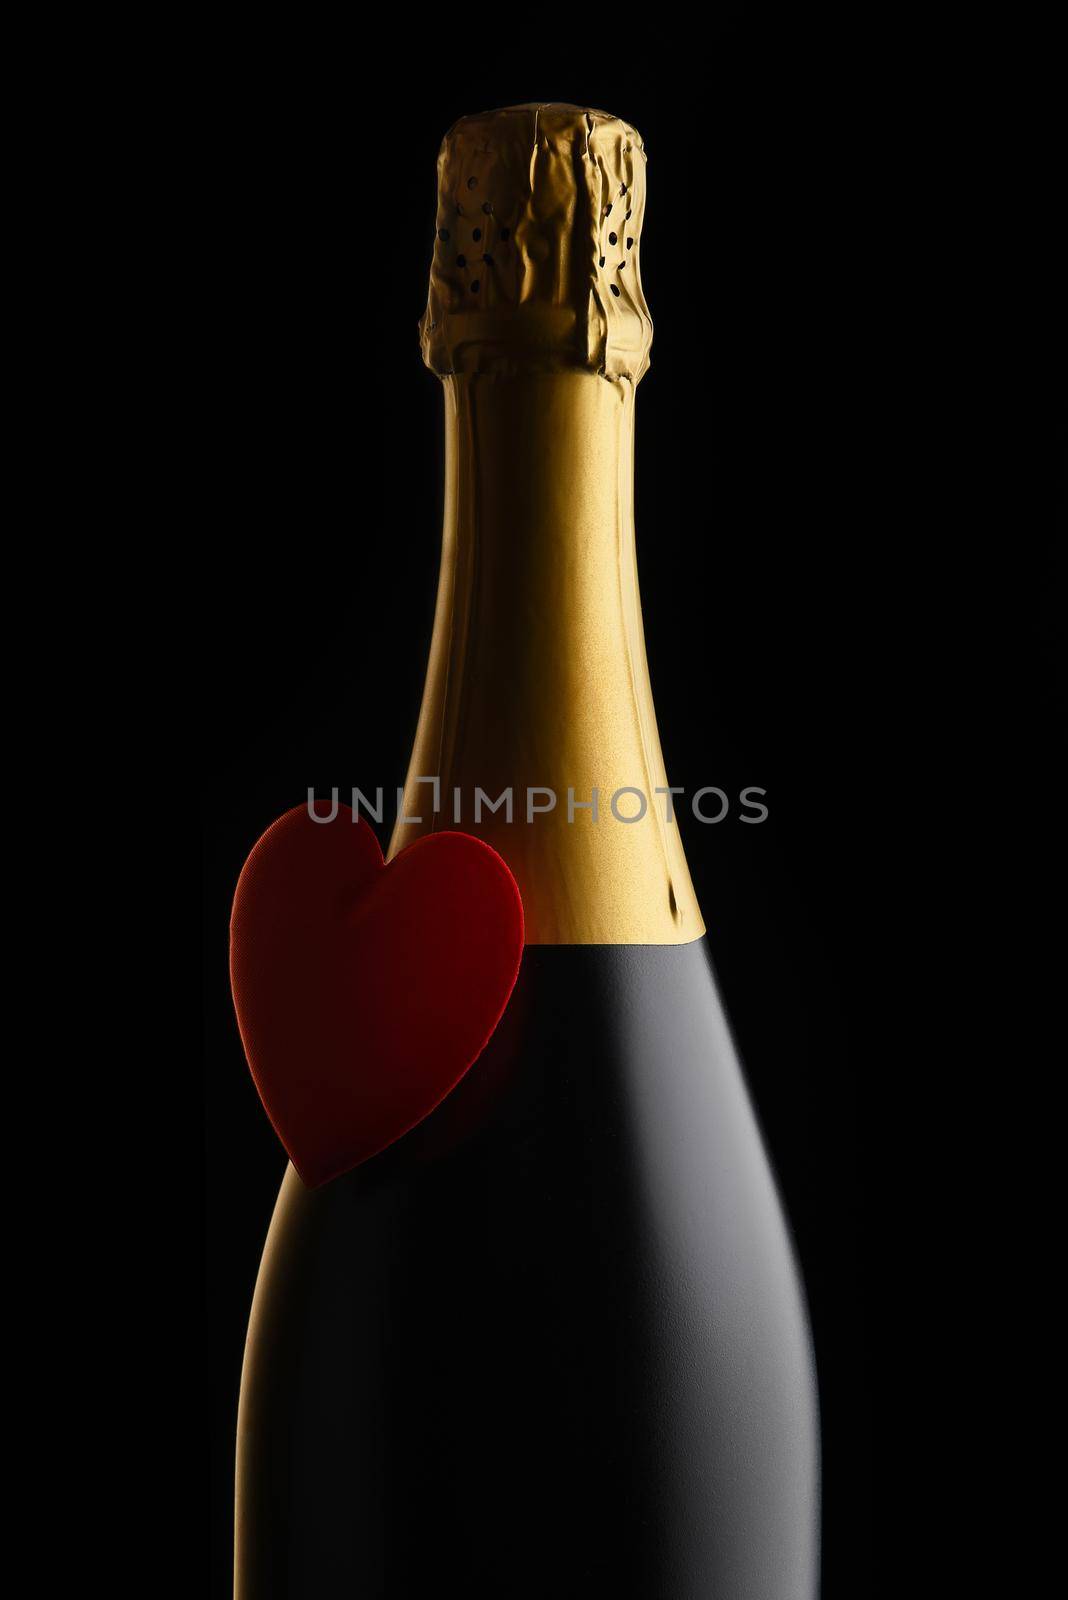  Closeup of a bottle of Champagne with a red heart against a black background by sCukrov